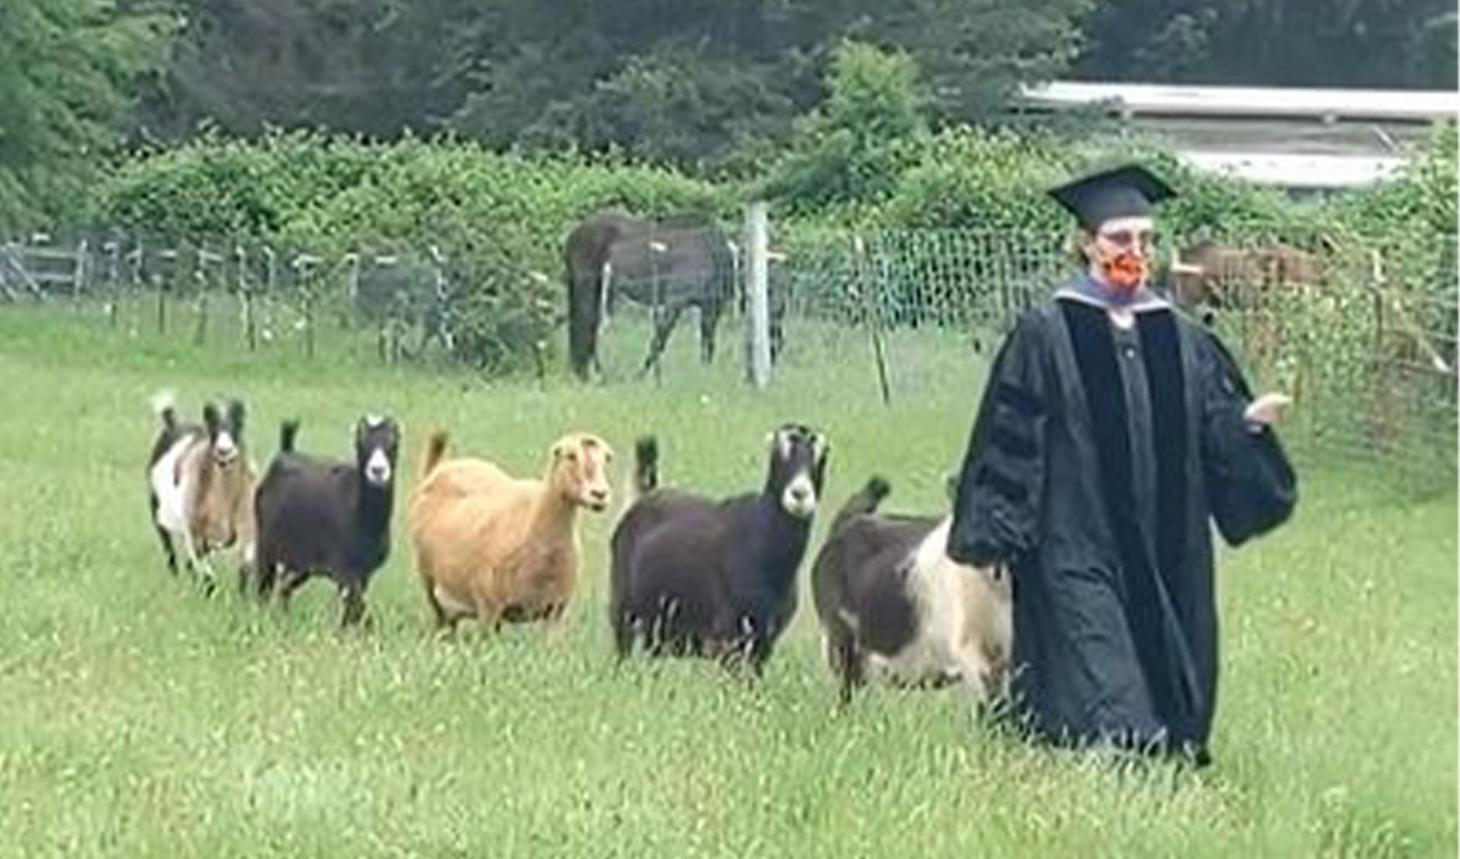 Linda marching in graduation gown with line of goats in field.